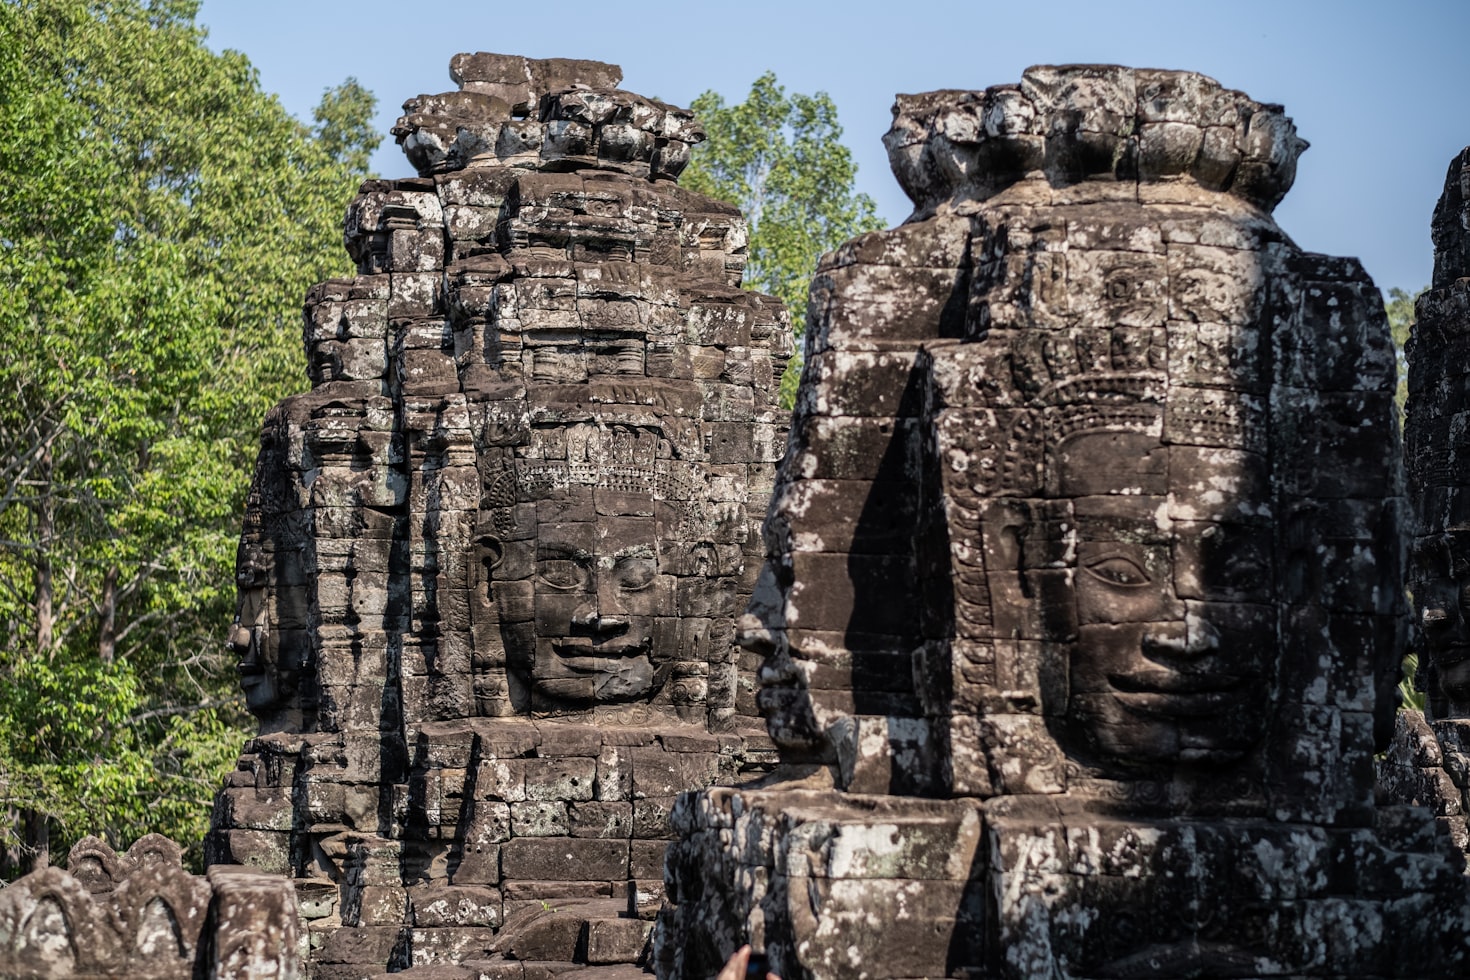 7-Day Siem Reap Itinerary: The Ultimate Guide to Angkor Wat